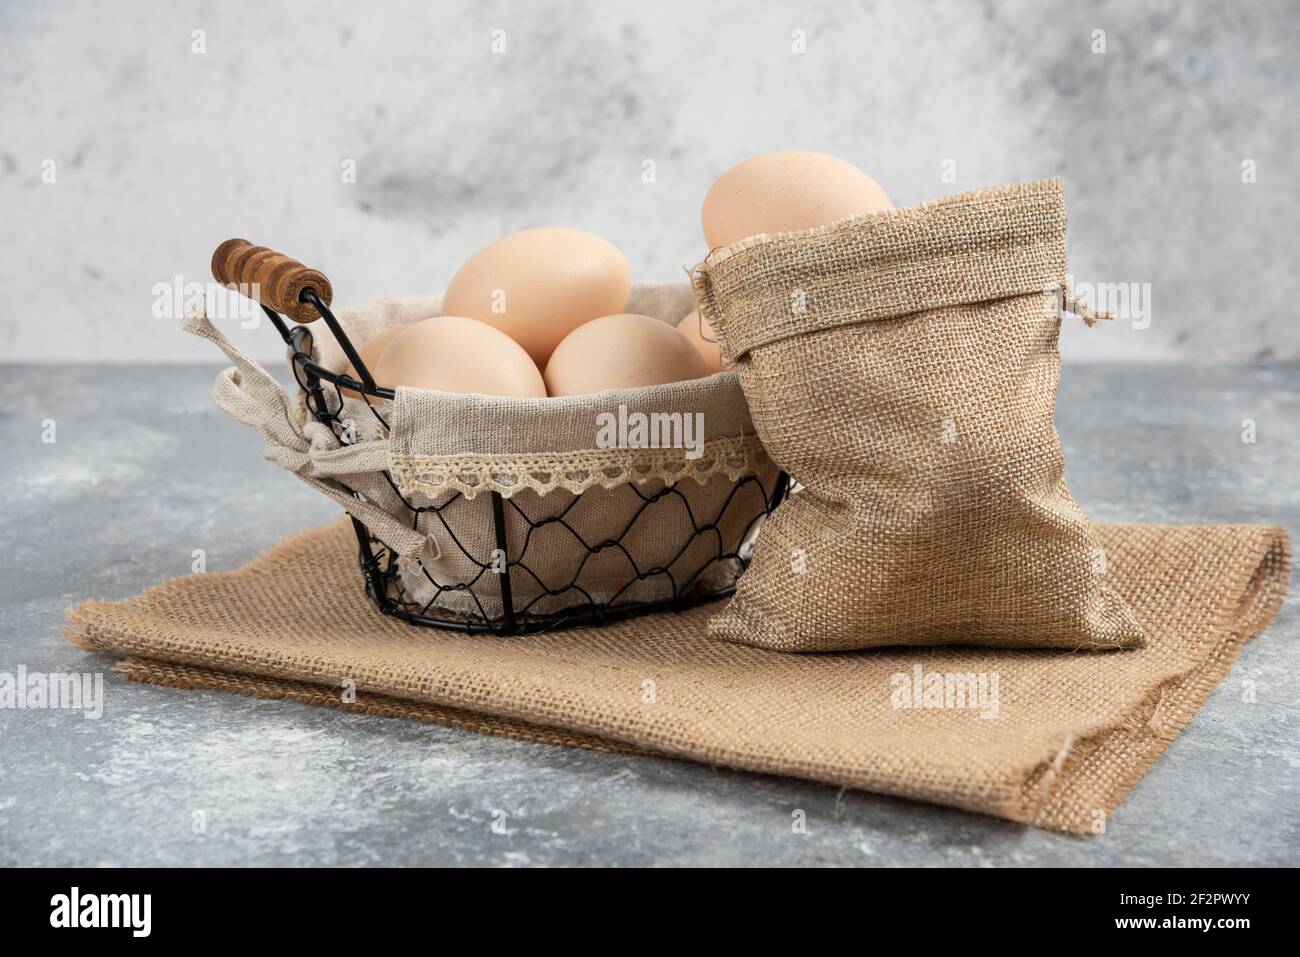 Basket and sackcloth of organic fresh uncooked eggs on marble surface Stock Photo